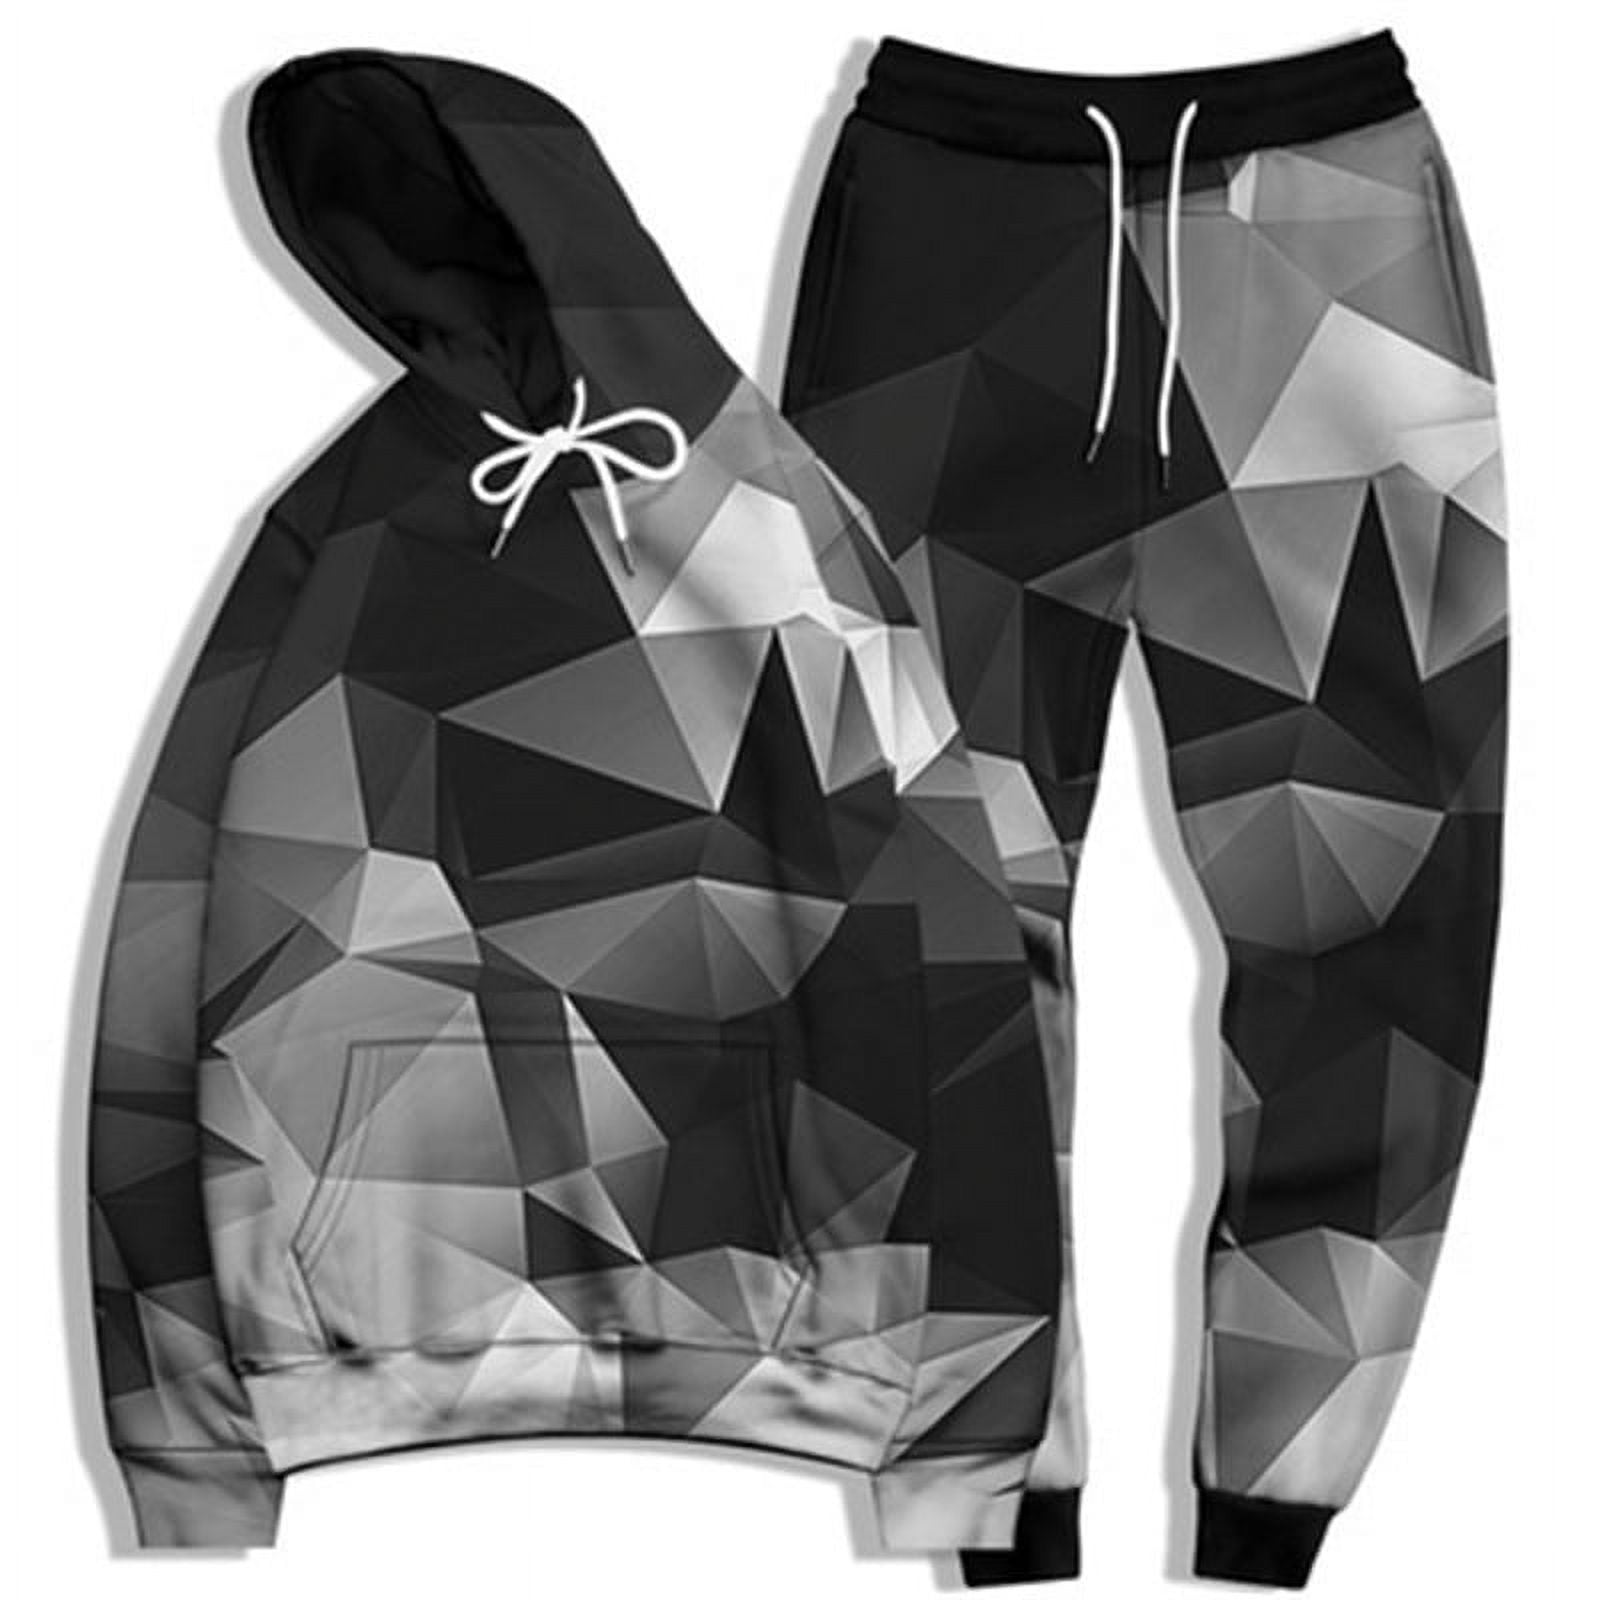 3D Novelty Colorful Print Hooded Athletic Tracksuit for Men Women 2 ...